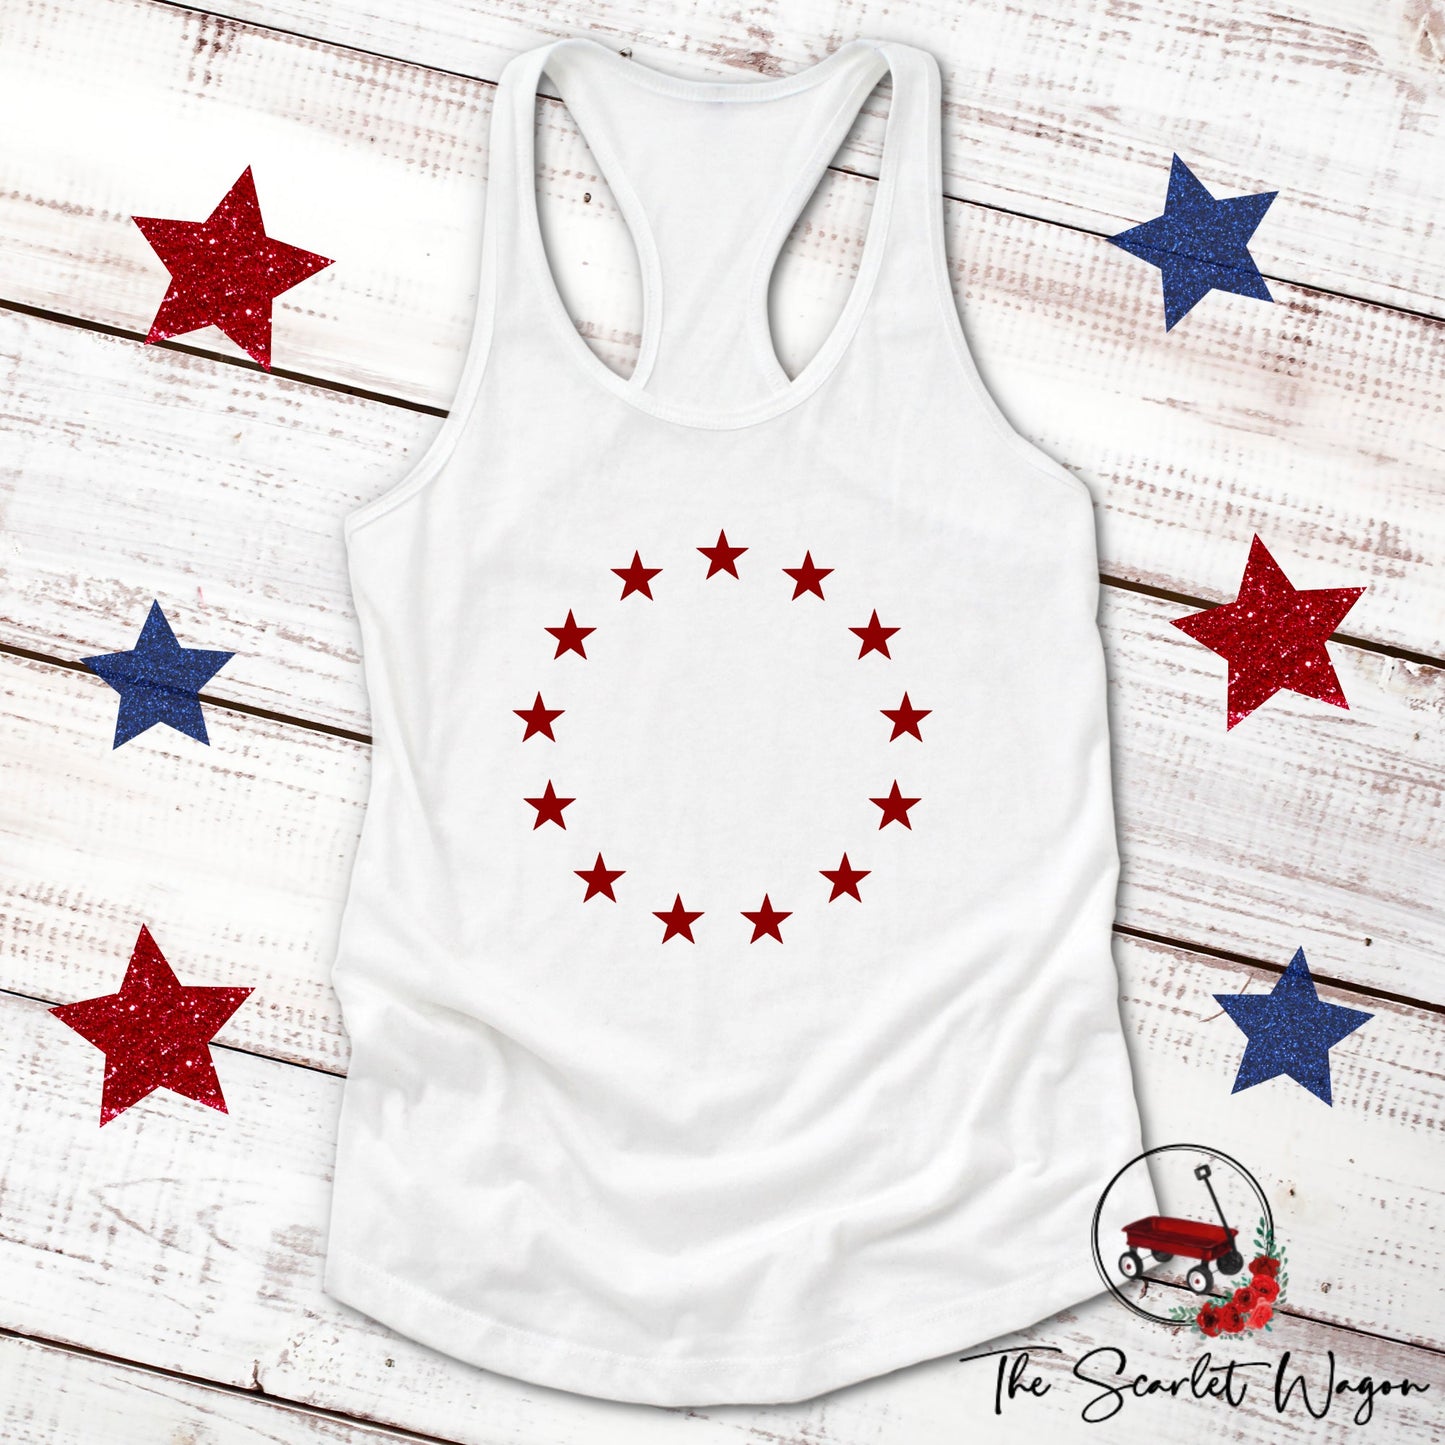 Betsy Ross Flag Women's Racerback Tank Patriotic Shirt The Scarlet Wagon Boutique White Small 